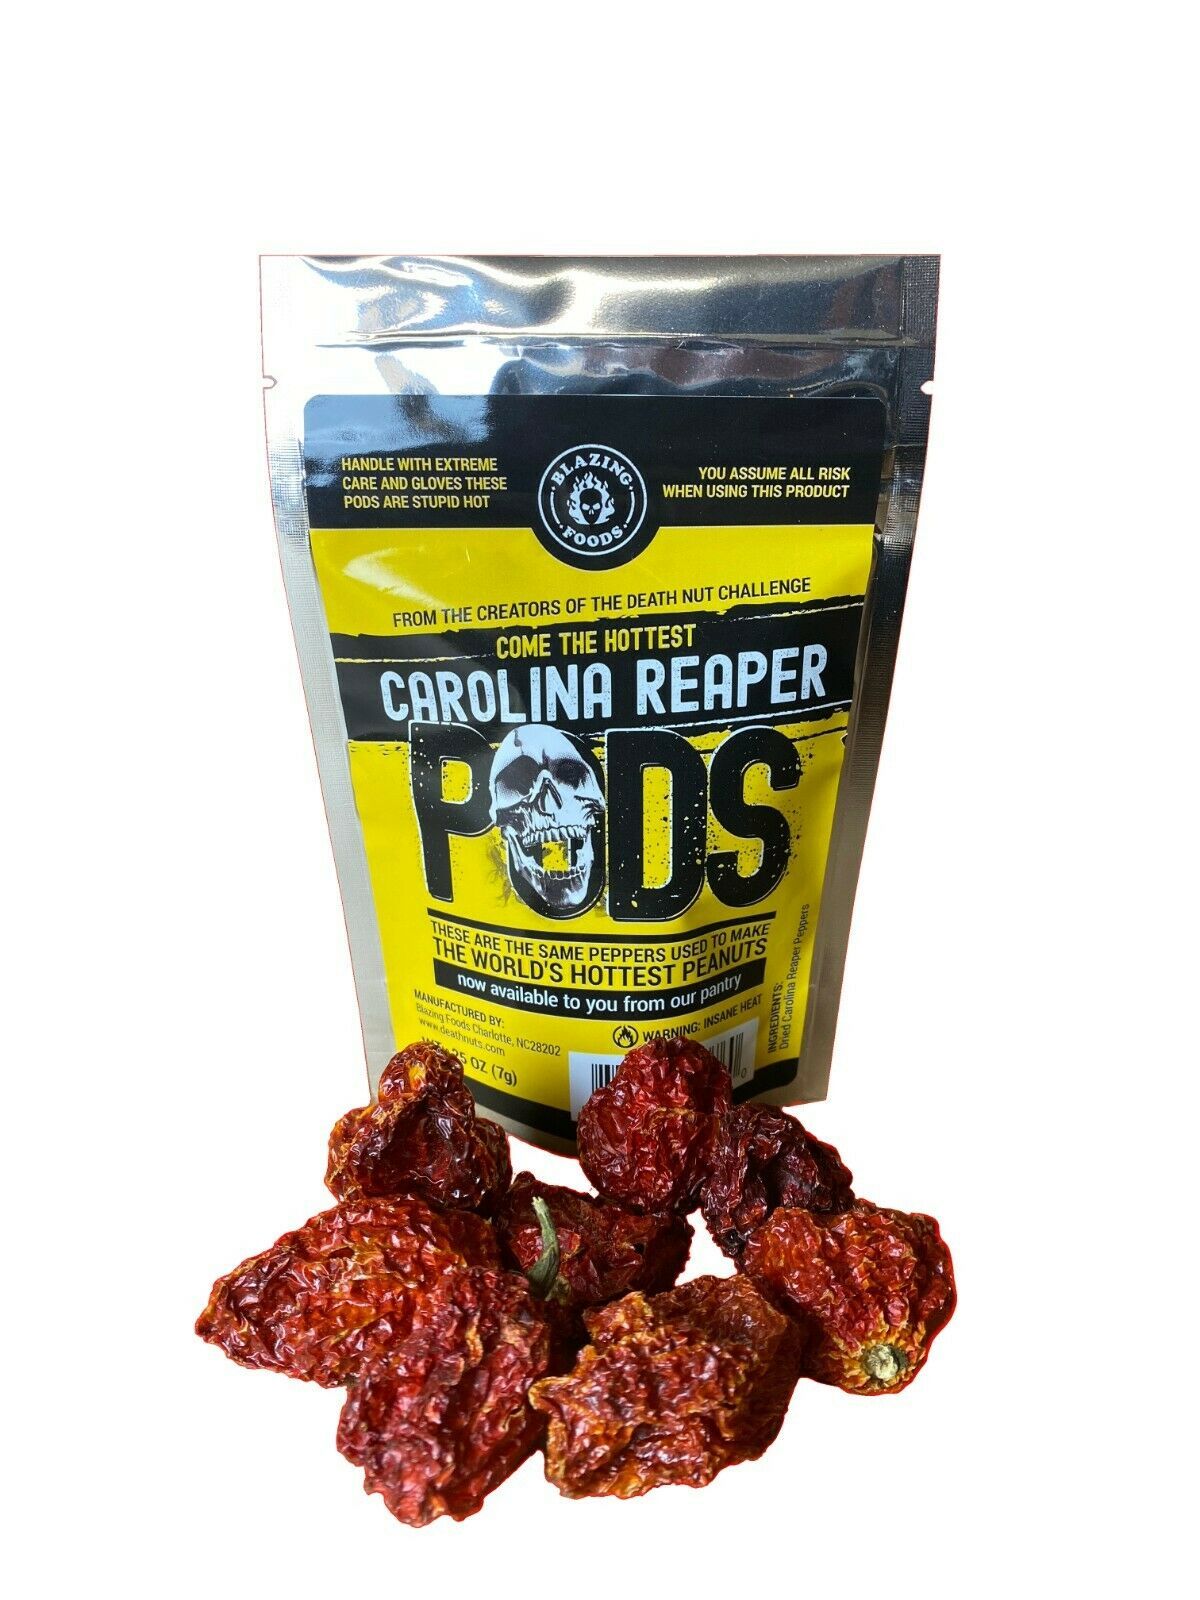 Carolina Reaper Pepper whole pods 1/4 oz worlds hottest hotter than Ghost Pepper